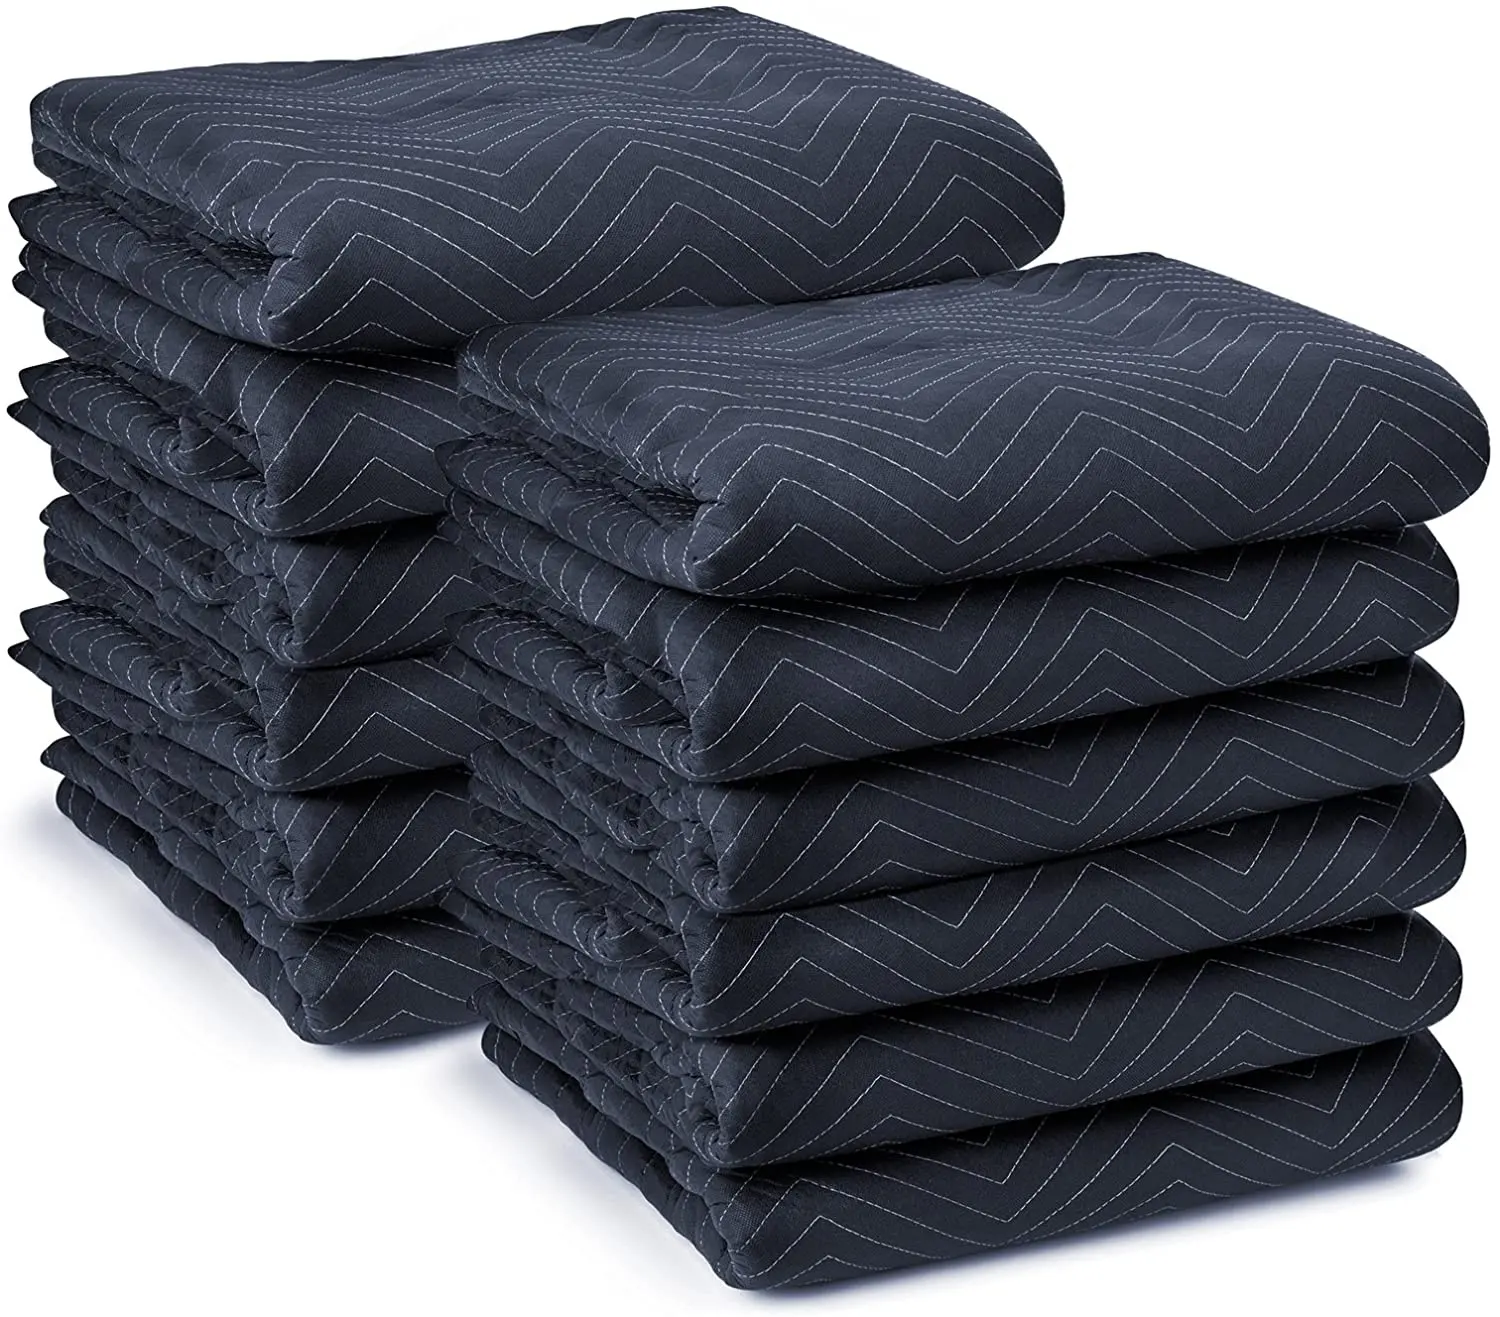 Oversize moving packing blankets pro economy quilted shipping furniture pads black grey navy blue